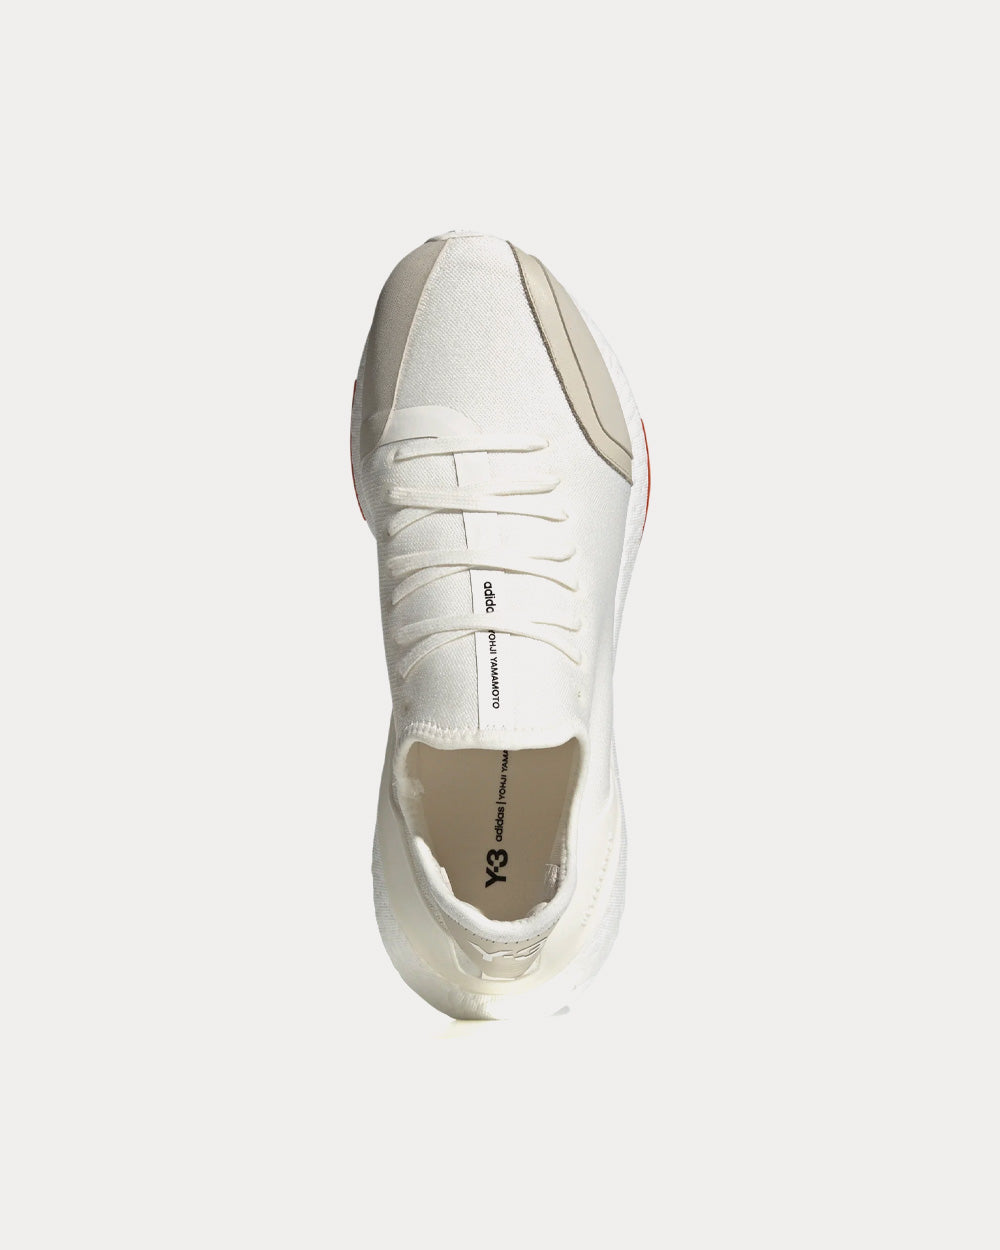 Y-3 - Ultraboost 21 Core White / Bliss / Bold Orange Running Shoes